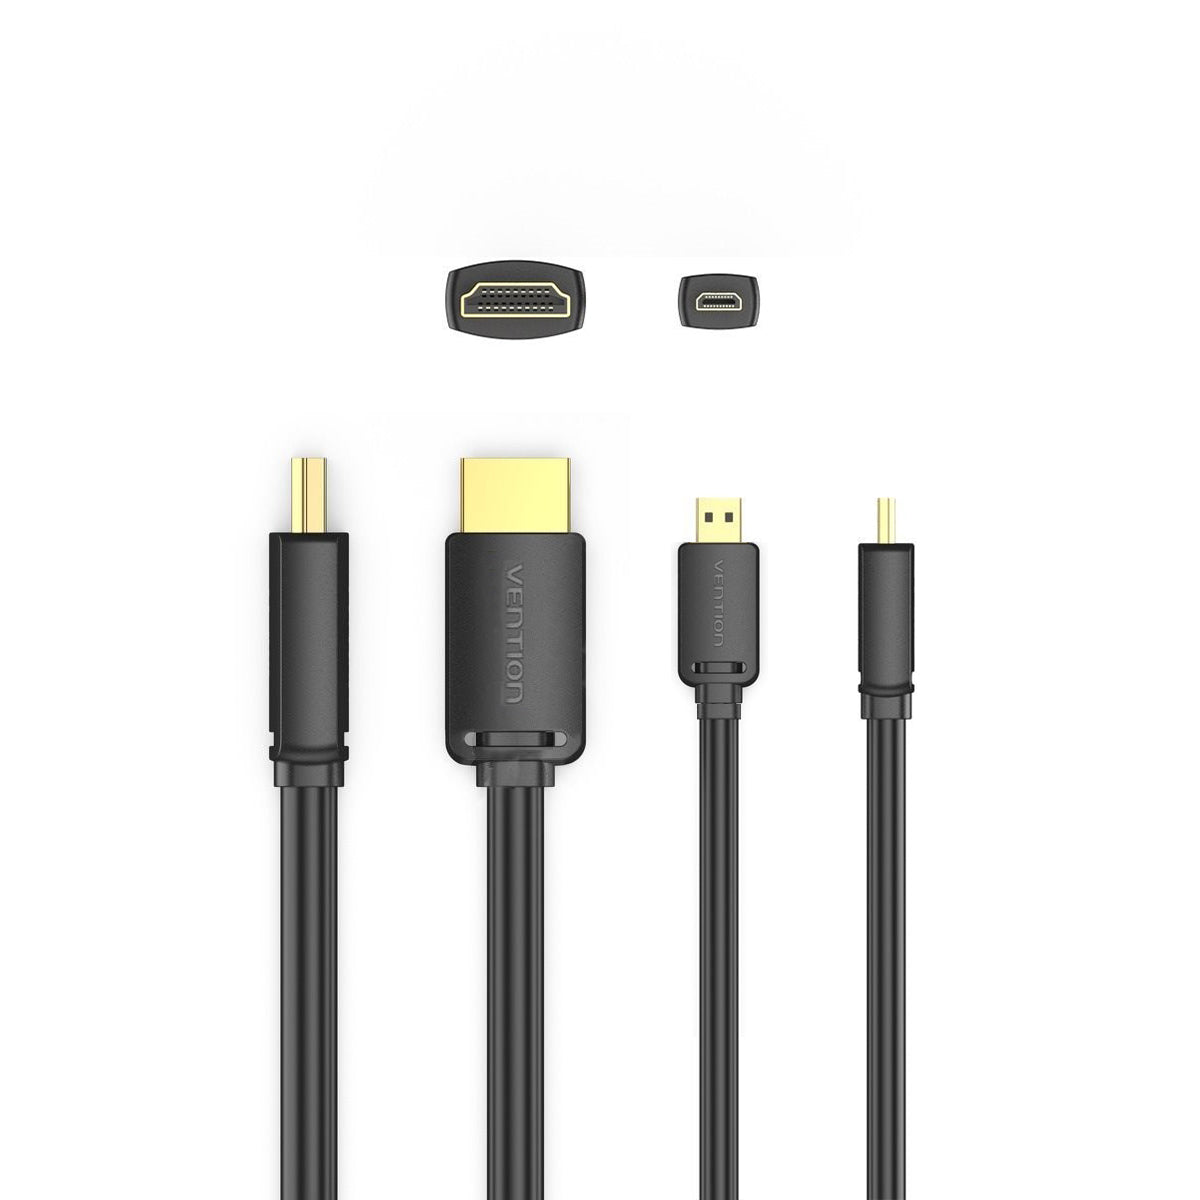 Vention 4K UHD 60Hz Micro HDMI to HDMI 2.0 Bidirectional Cable with HDR Support, 18 Gbps Bandwidth and Gold Plated Contacts for PC, Cameras, and Consoles (1m, 1.5m. 2m, 3m) | AGIBF AGIBG AGIBH AGIBI